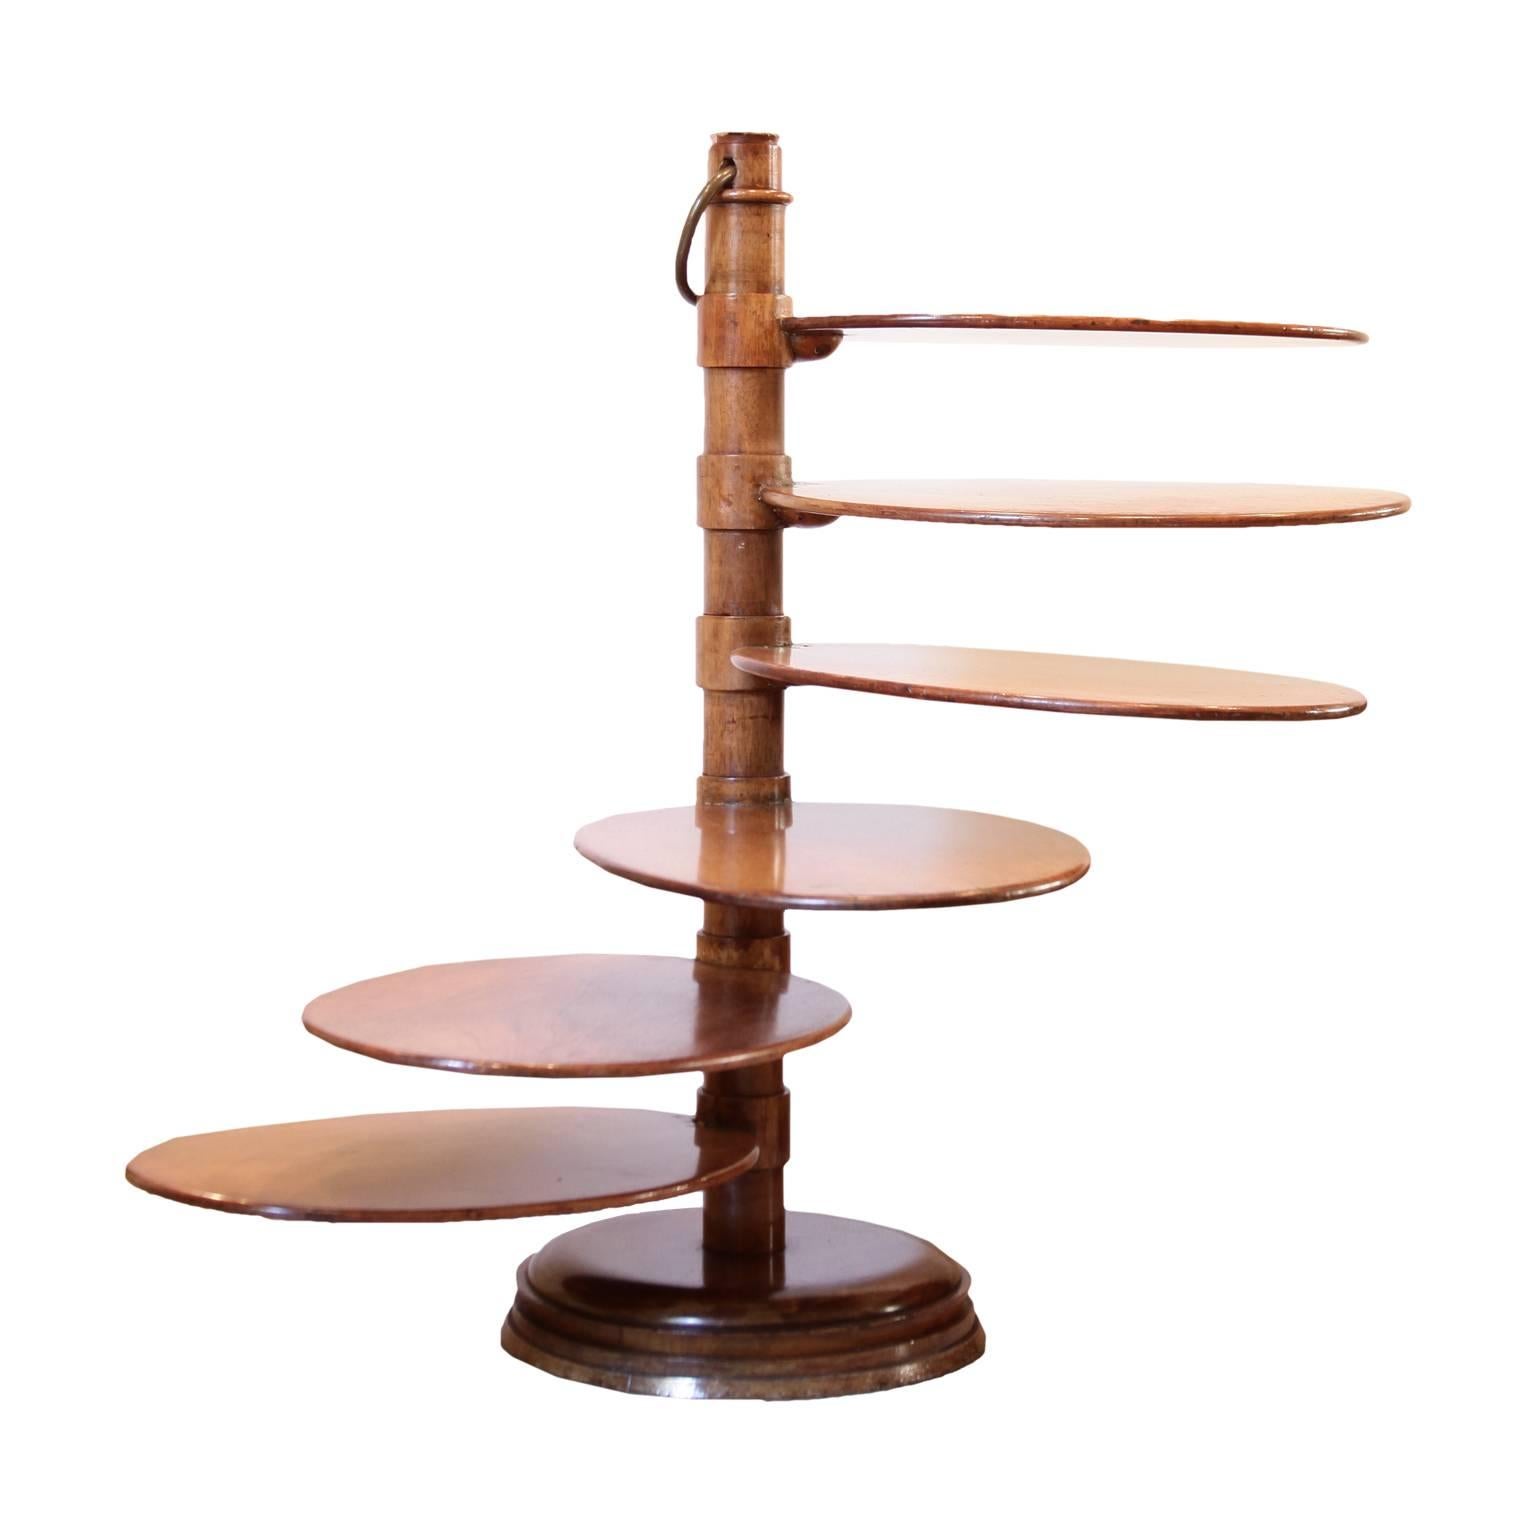 Modernist Tray Holder or Side Table in Walnut for The Piero Portaluppi House For Sale